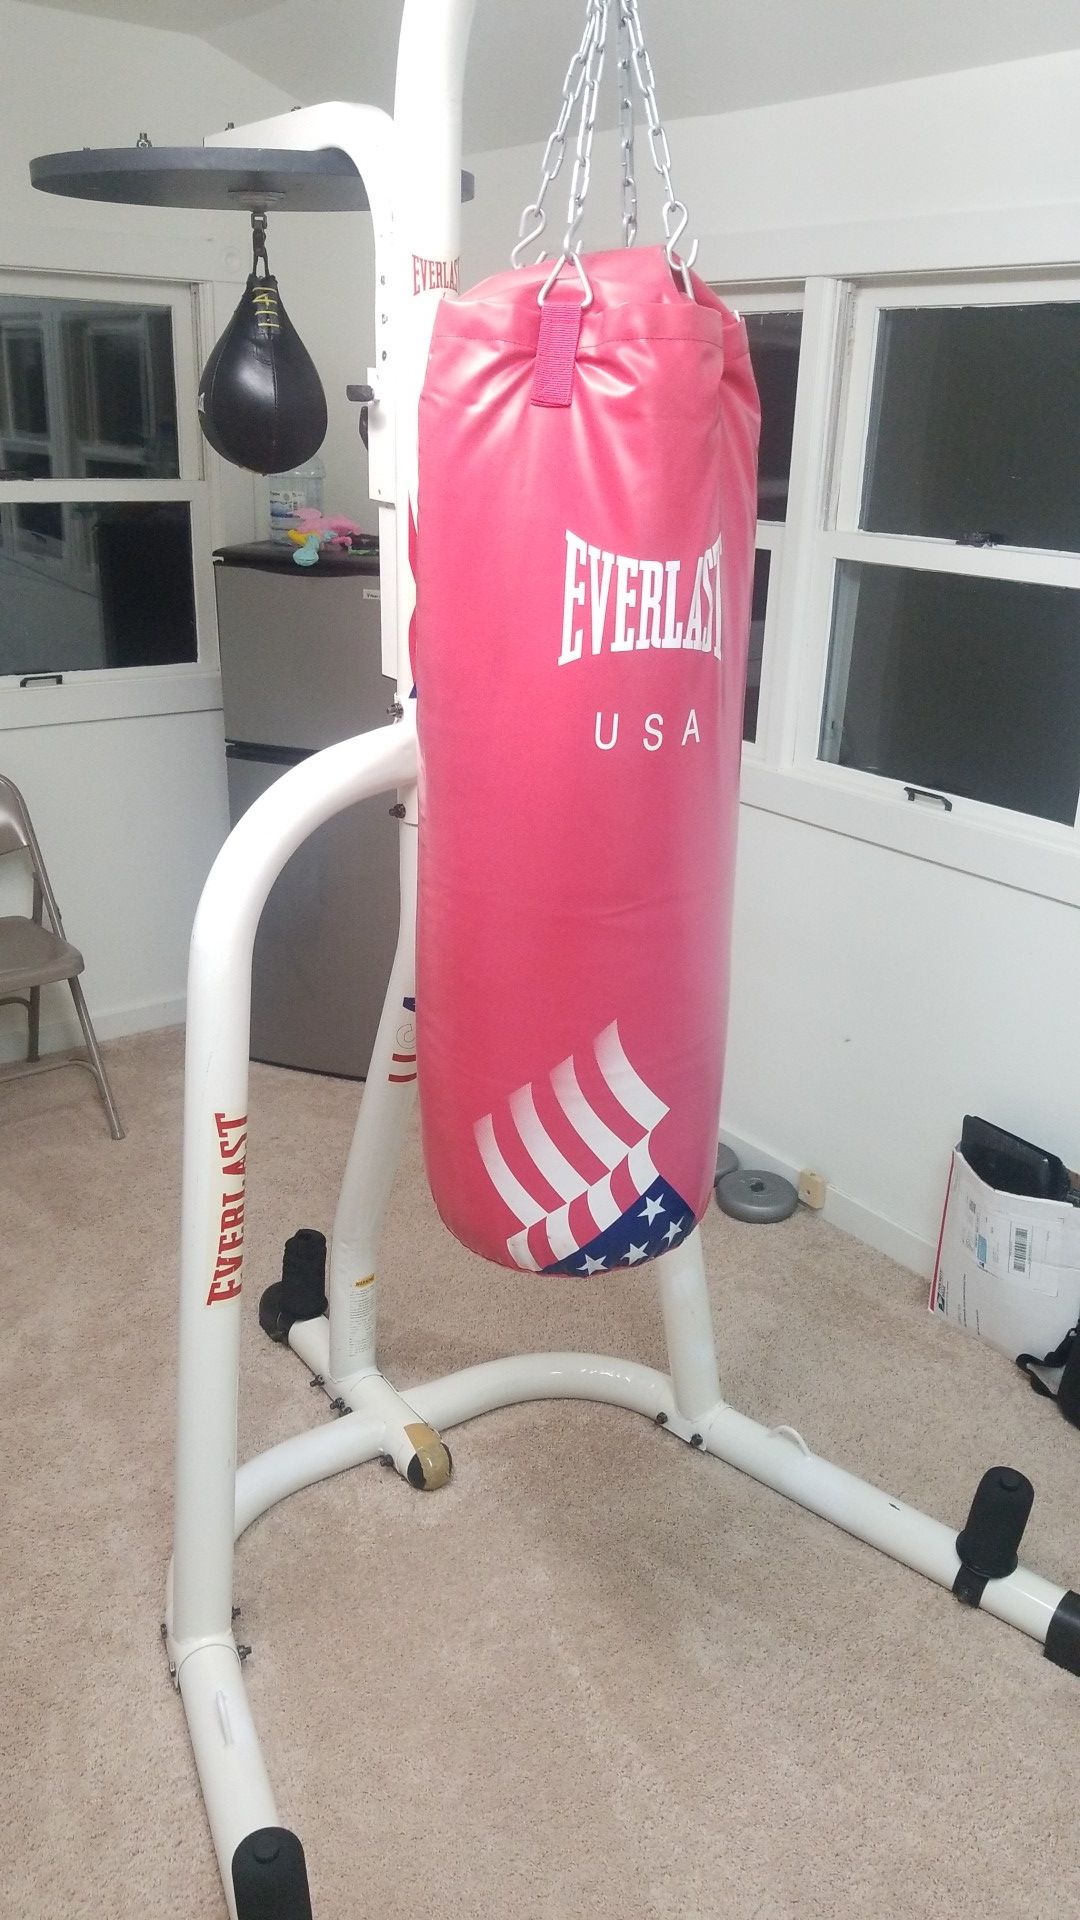 Everlast boxing stand complete with punching bag and speed bag